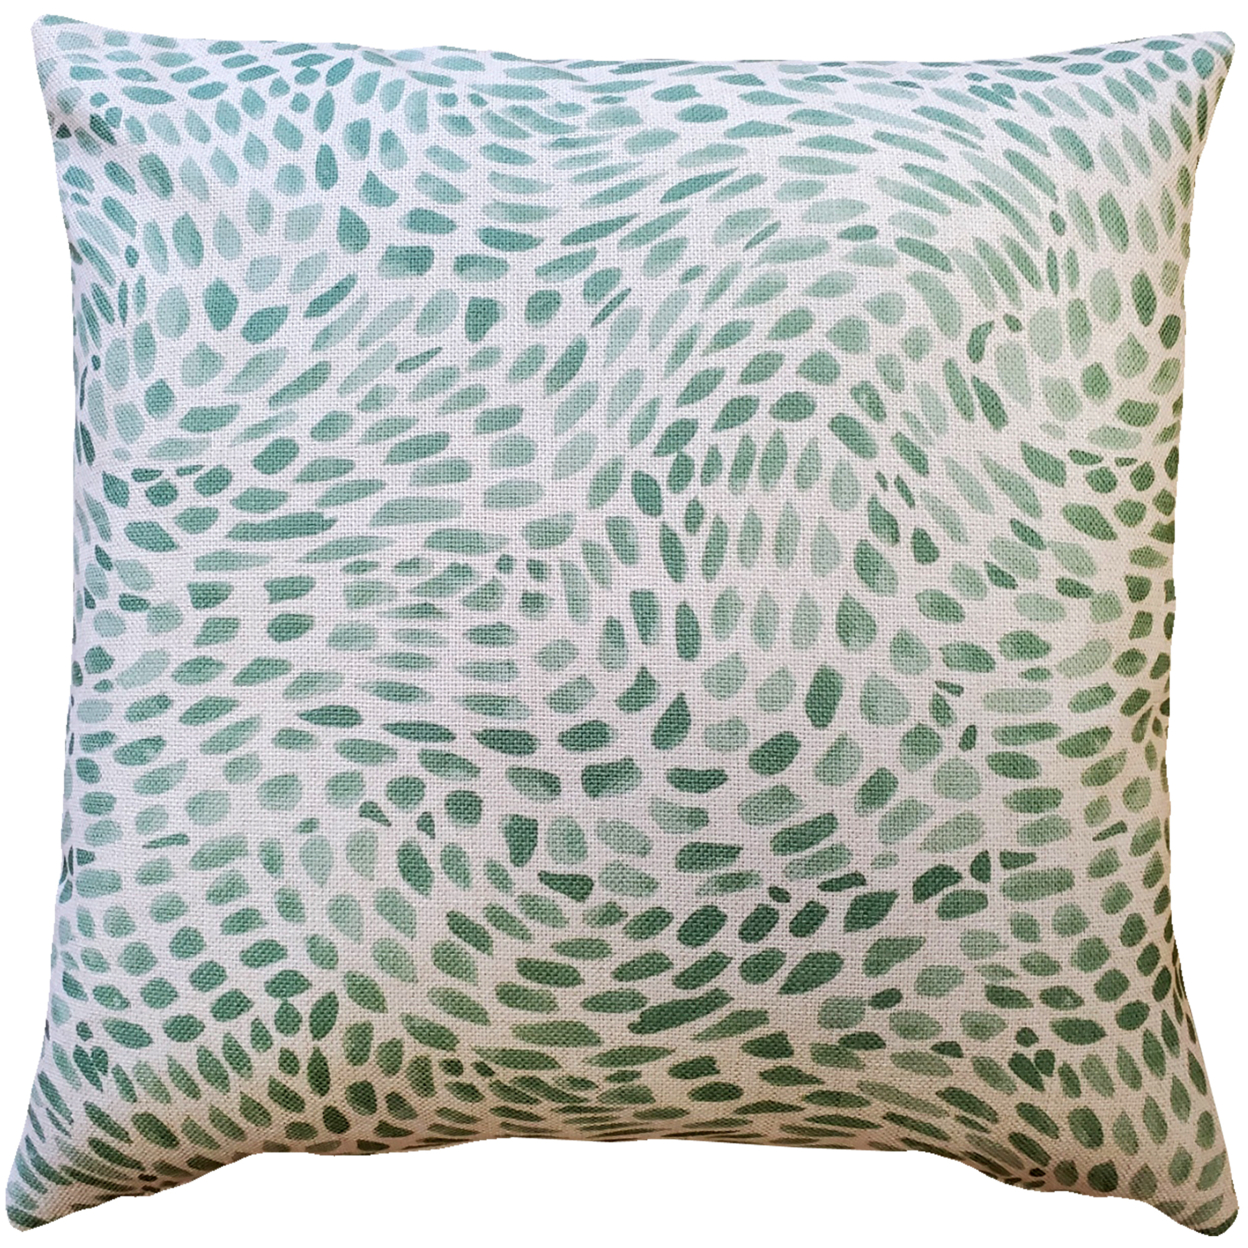 Matisse Dots Spring Green Throw Pillow19x19 Inches Square, Complete Pillow With Polyfill Pillow Insert